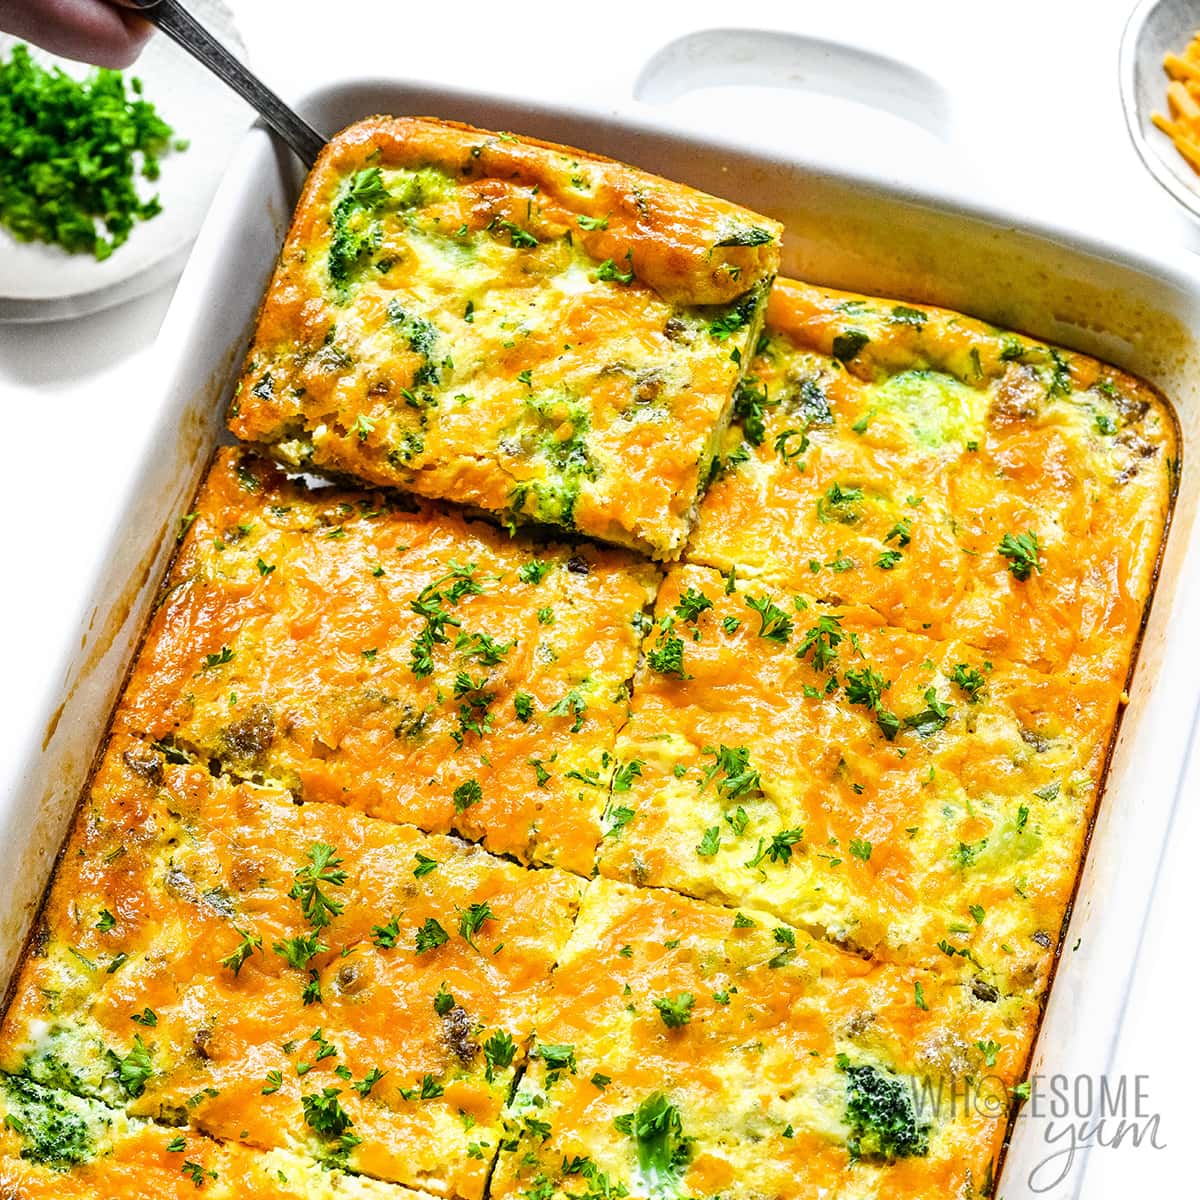 Healthy Keto Low Carb Breakfast Casserole Recipe with Sausage